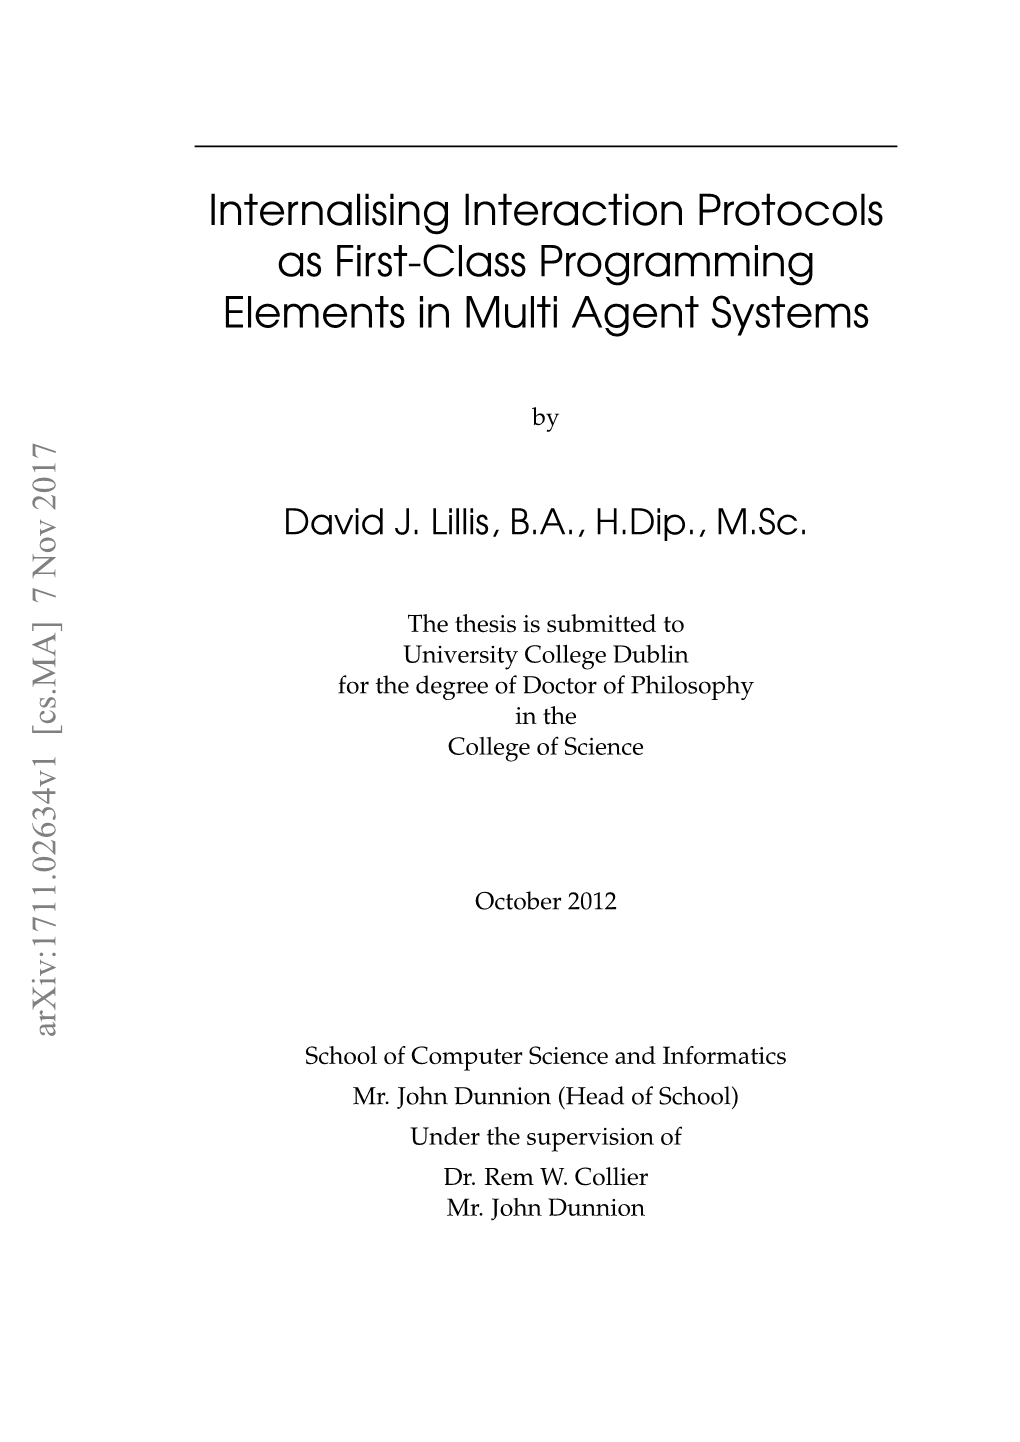 Internalising Interaction Protocols As First-Class Programming Elements in Multi Agent Systems